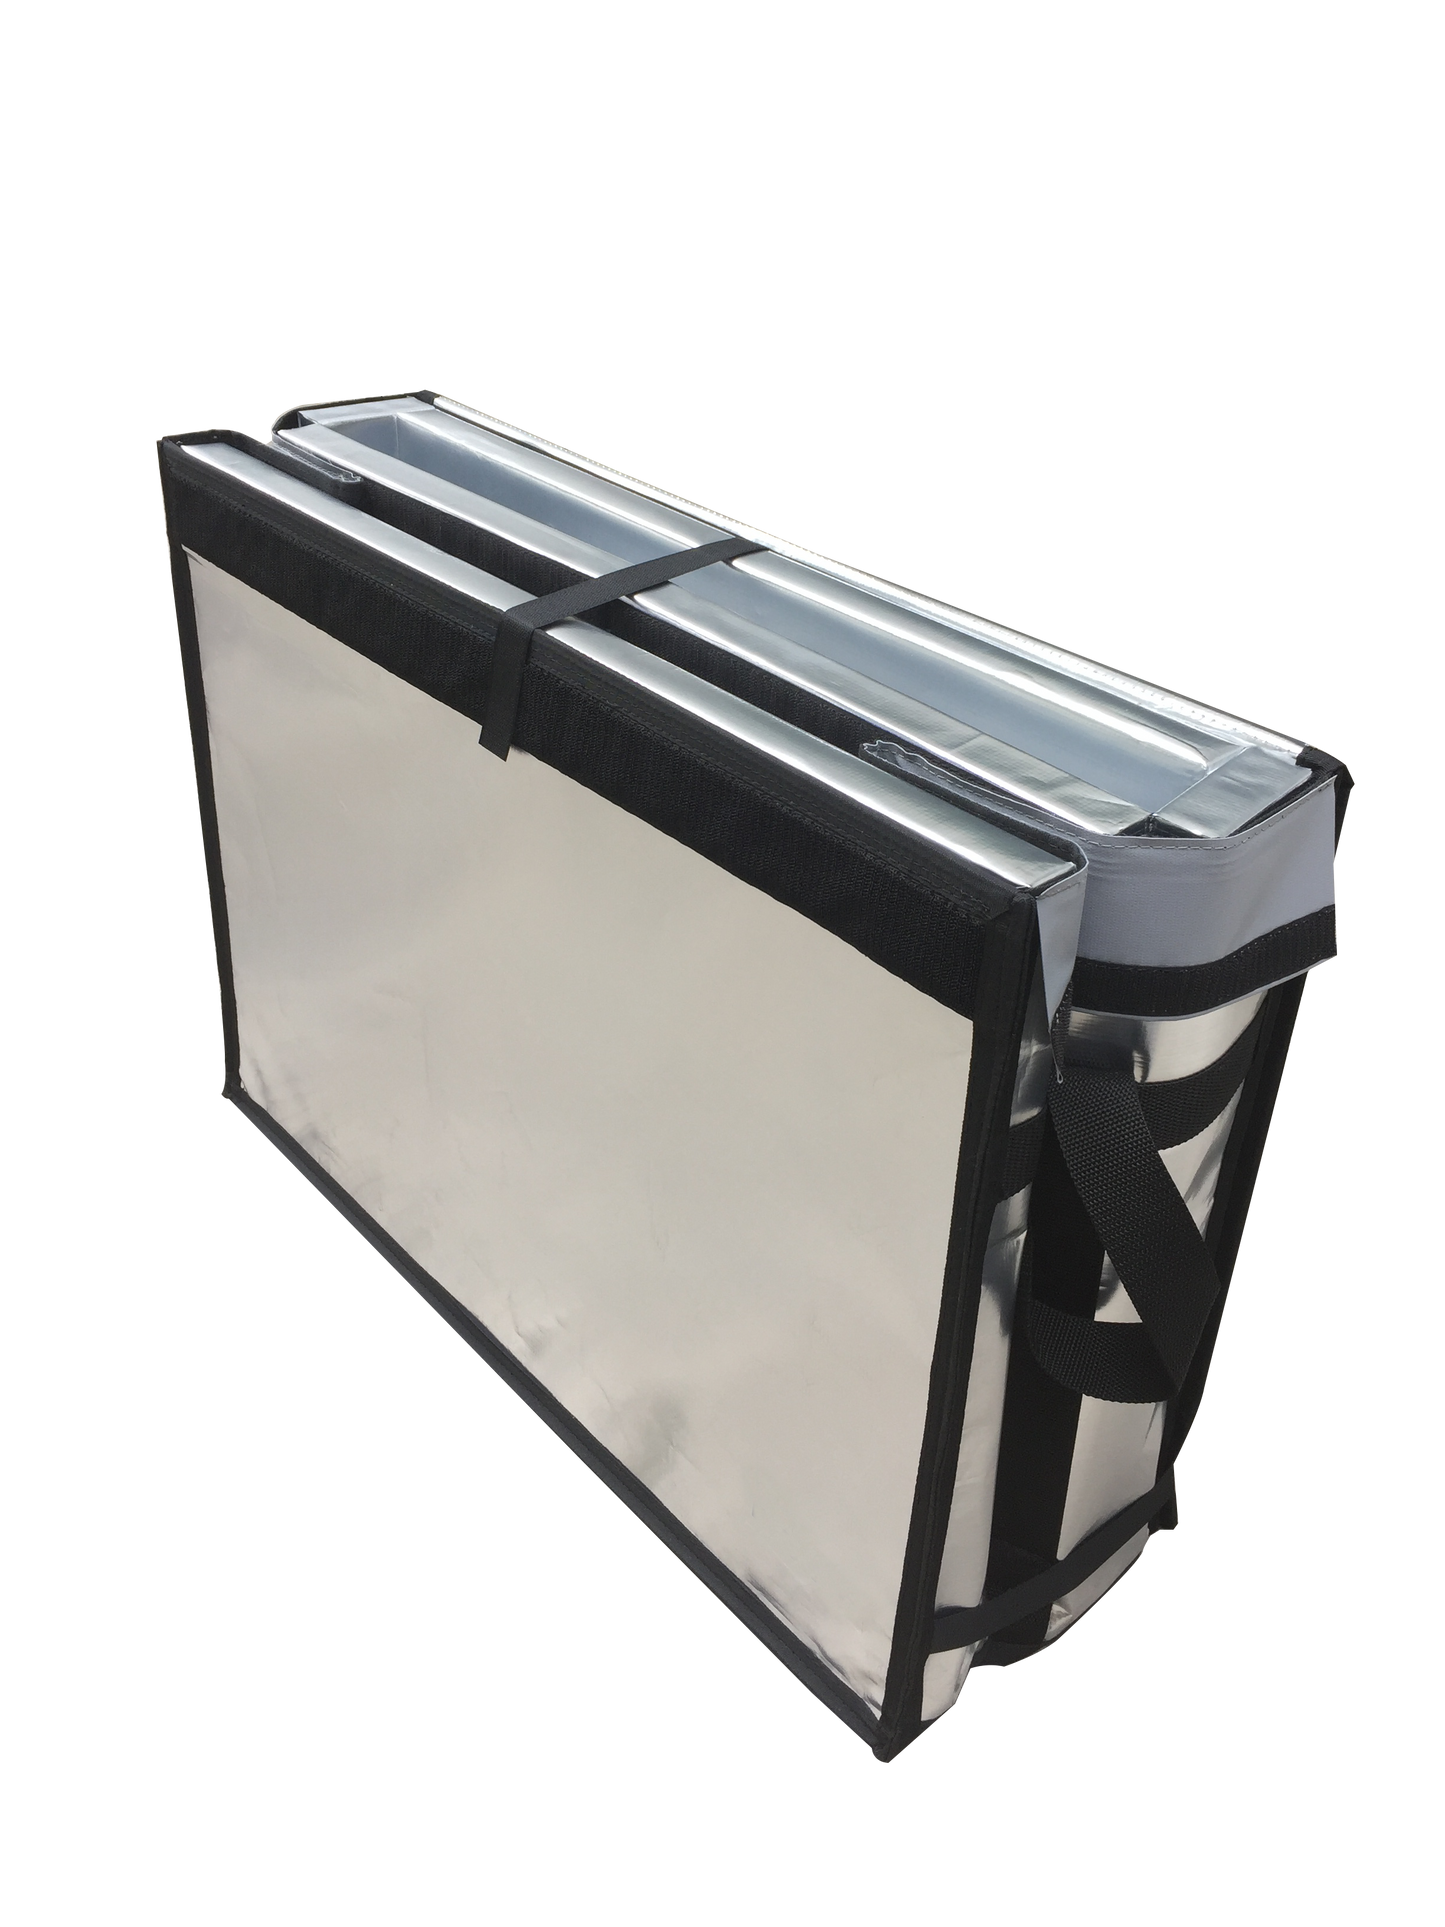 J-BOX FRESH ONE Multi-purpose foldable cooling box with high-performance insulation